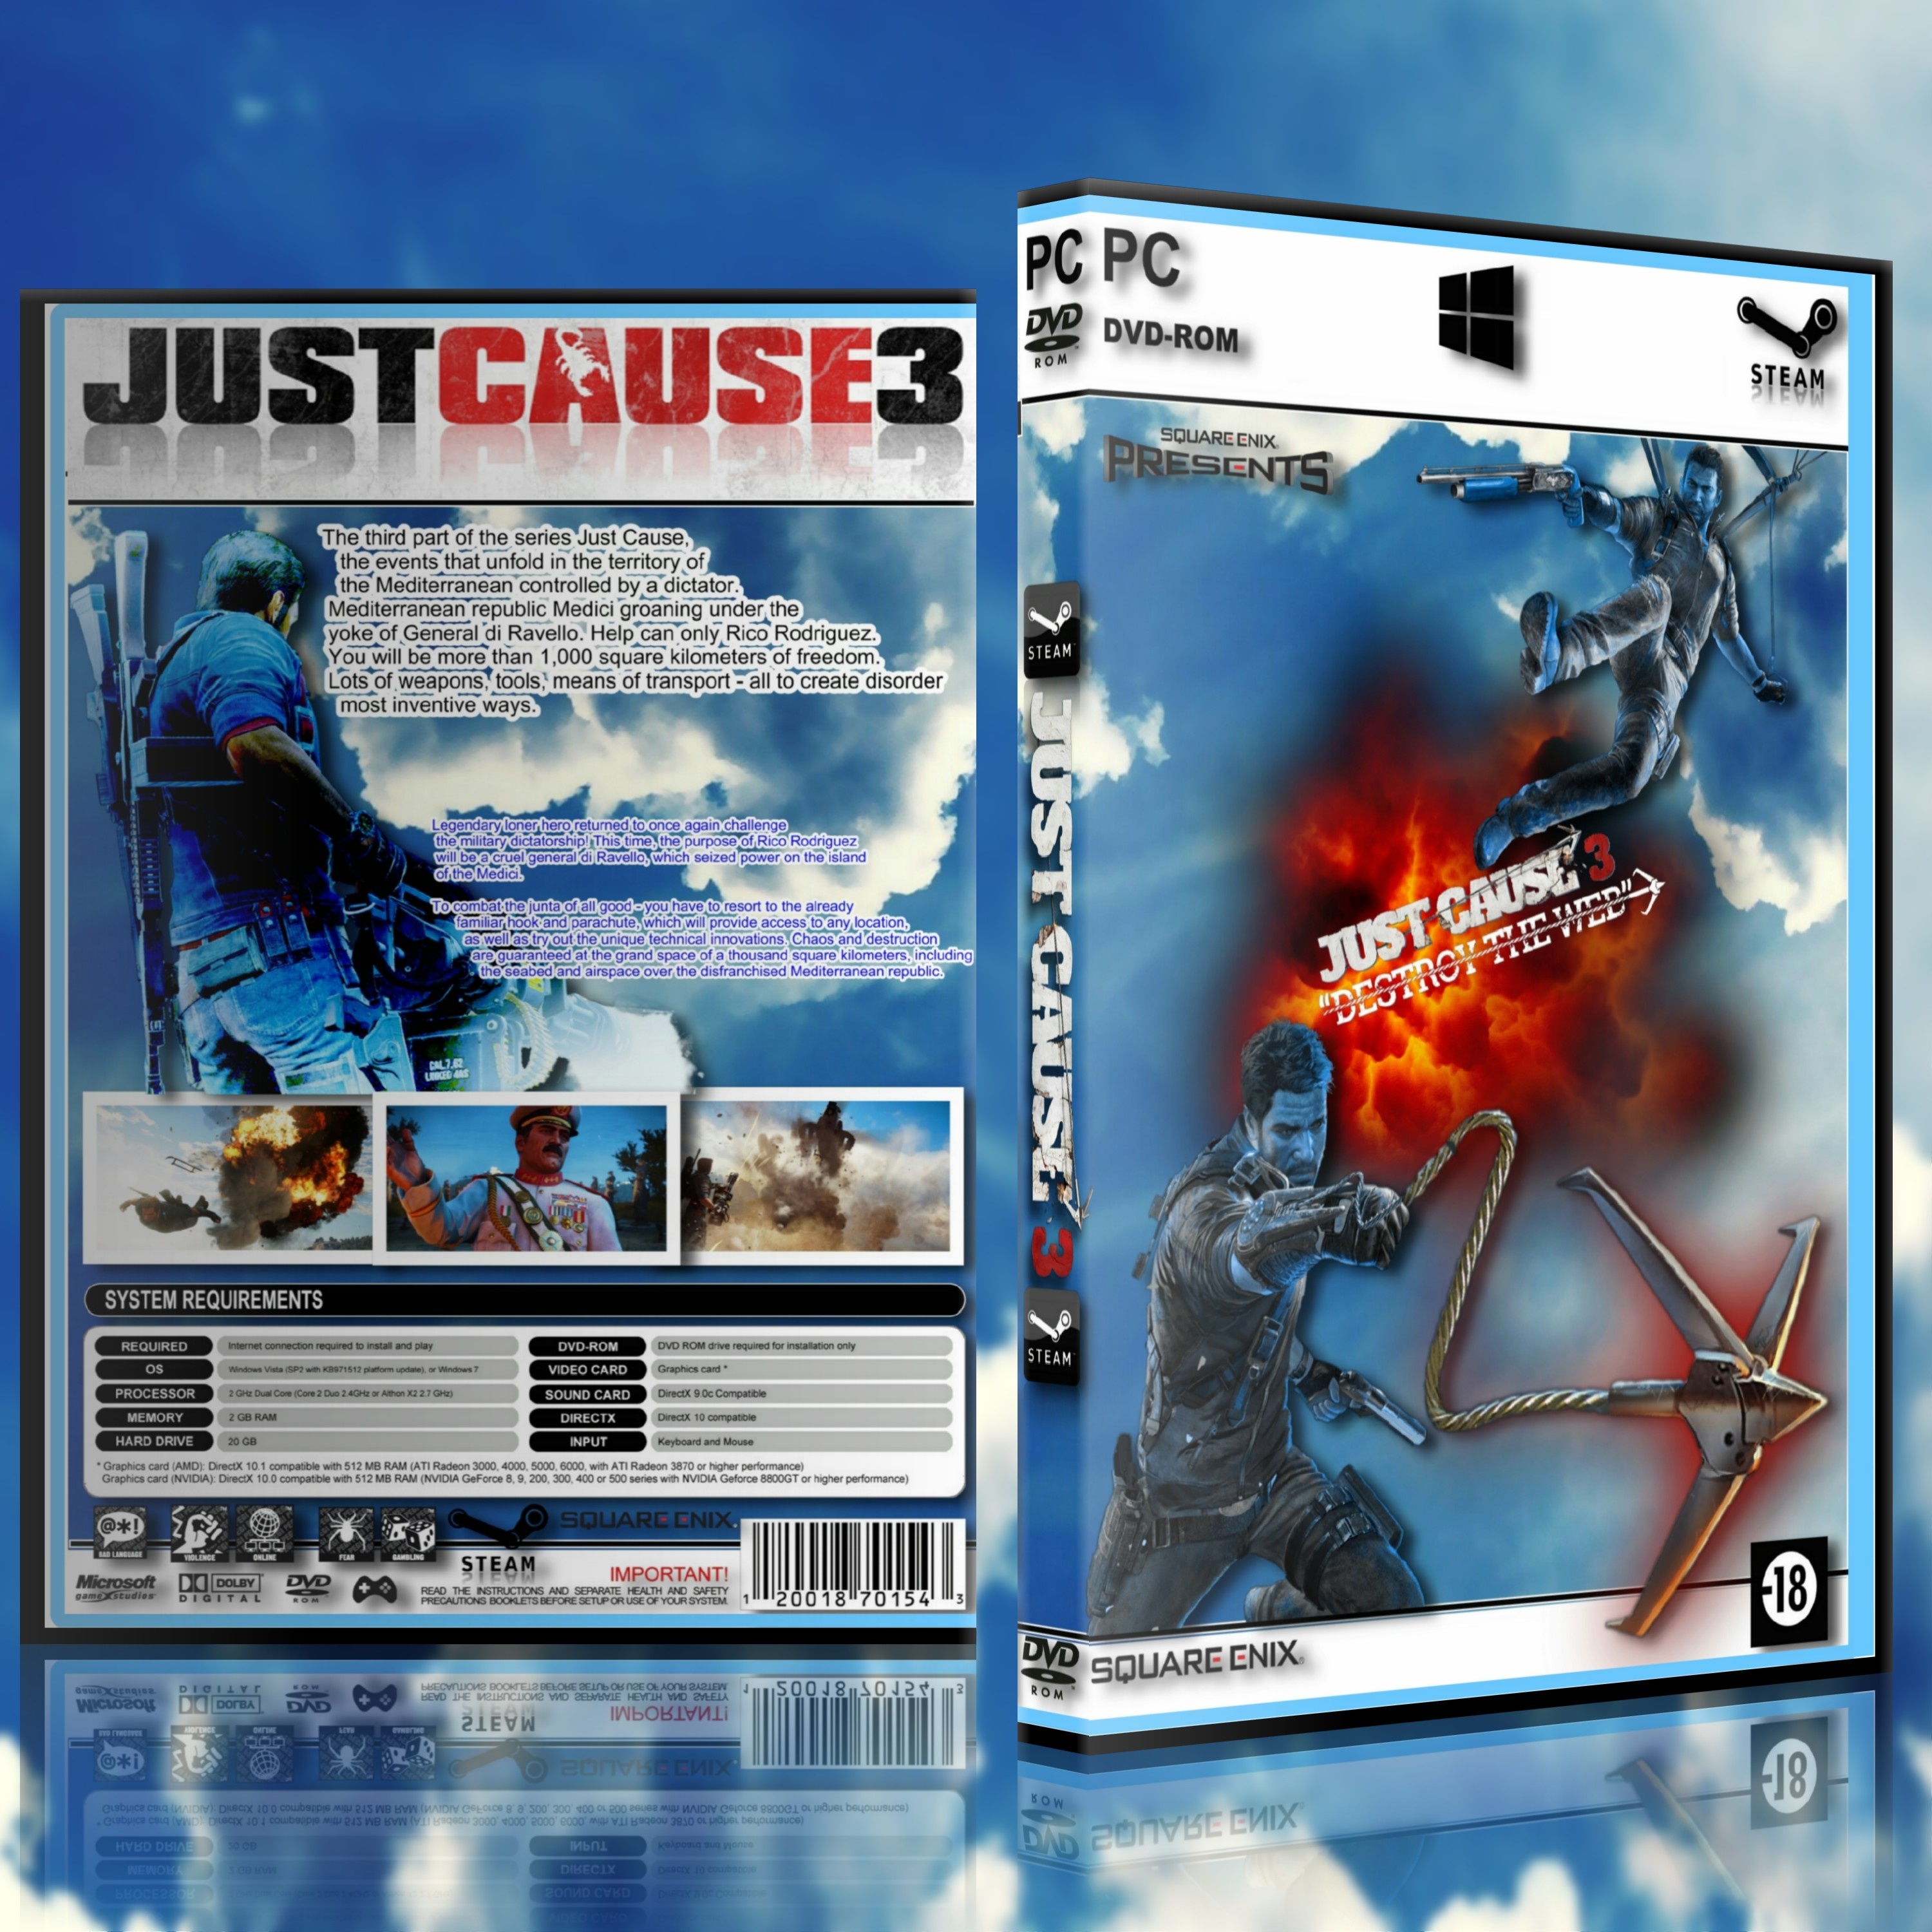 Just Cause 3 box cover